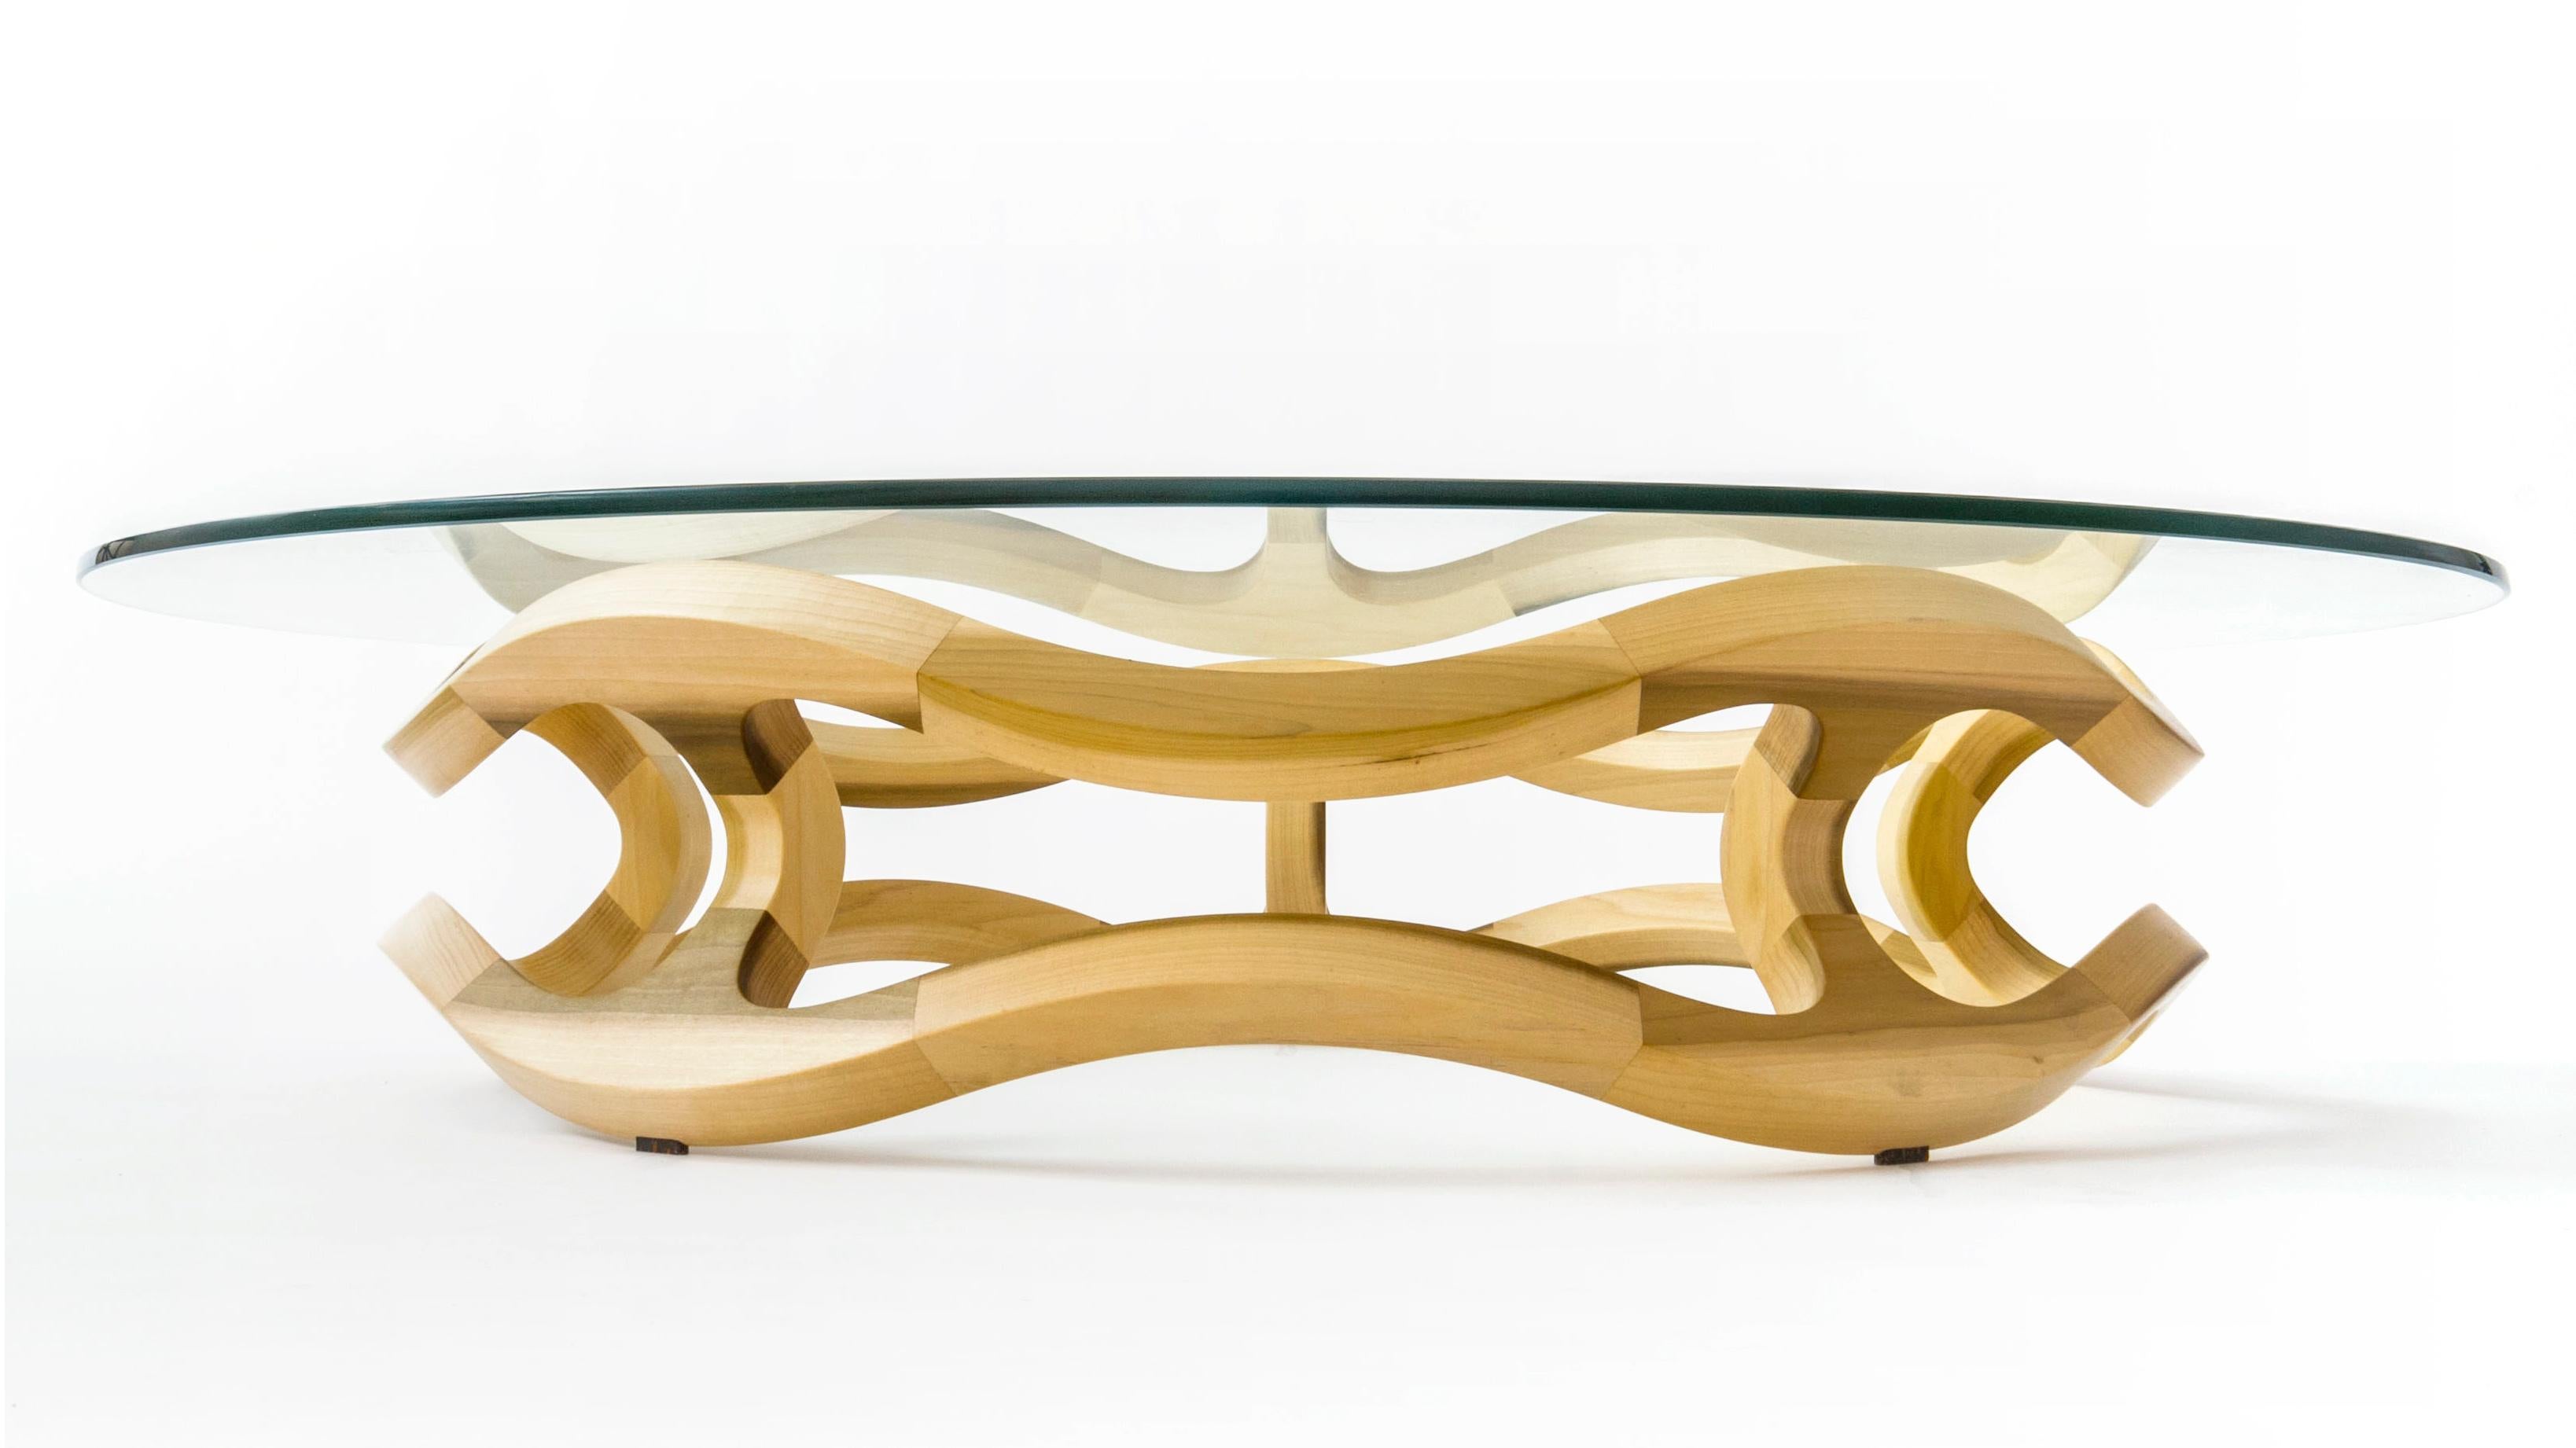 This contemporary sculptural table is created by renowned Mexican Industrial designer Pedro Cerisola, whose work is in the permanent collection of the National Autonomous University Science Museum and has been exhibited in the Franz Mayer Design